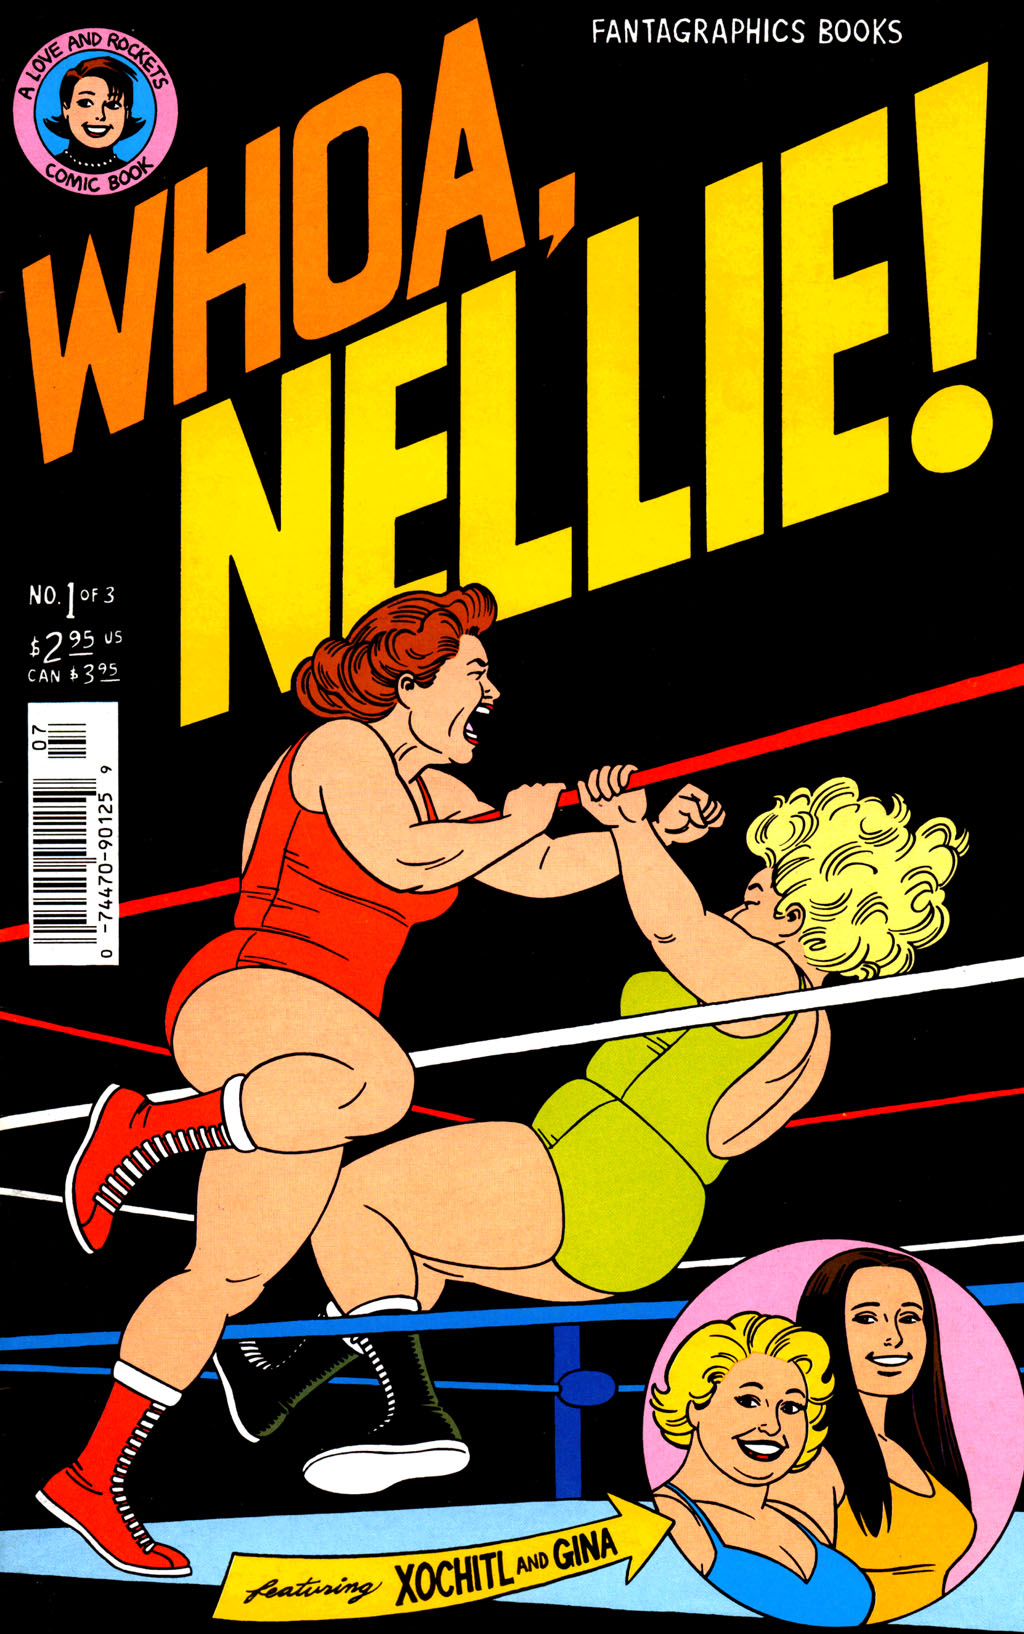 Read online Whoa, Nellie! comic -  Issue #1 - 1